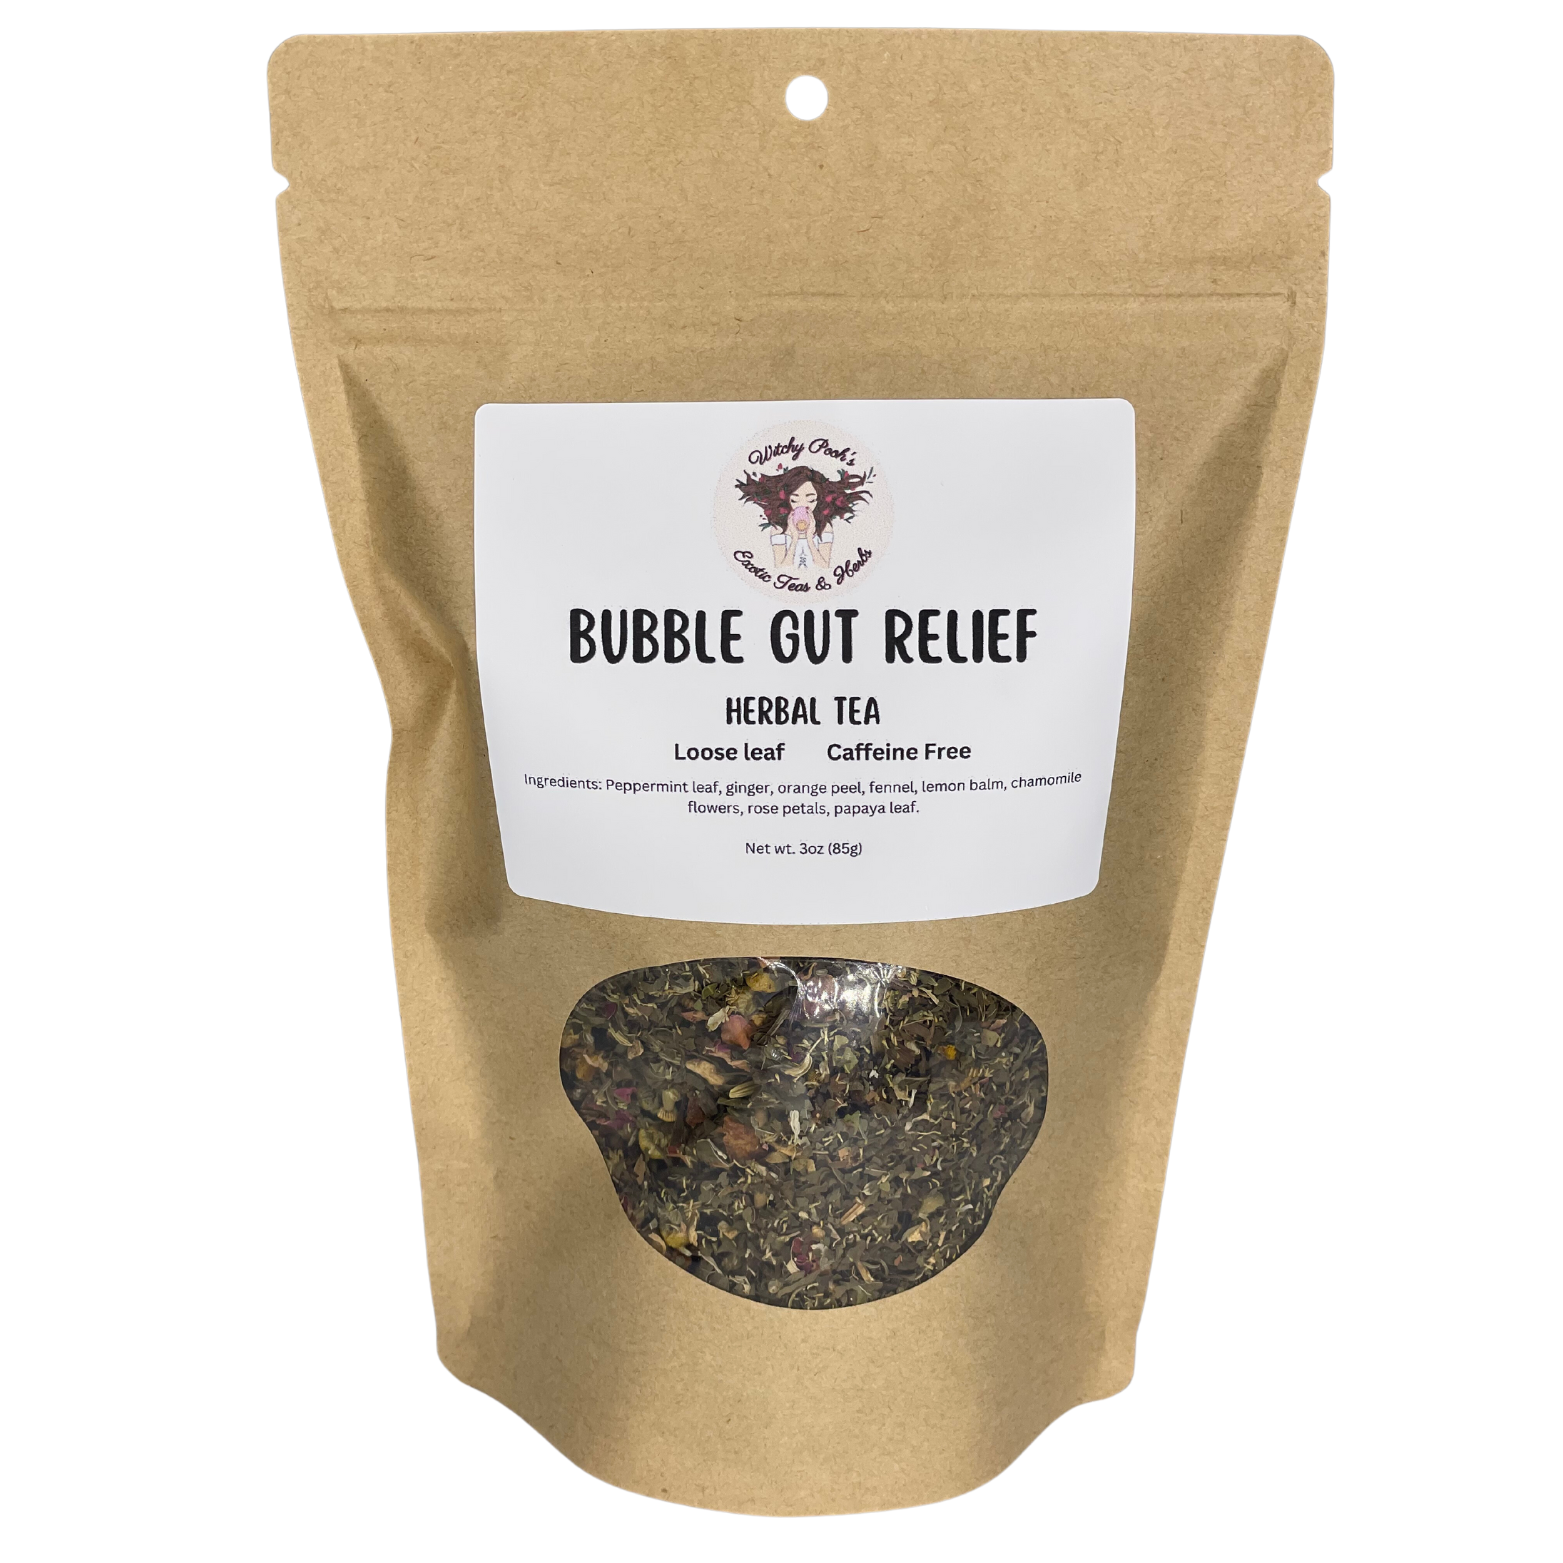 Witchy Pooh's Bubble Gut Relief Loose Leaf Herbal Functional Tea, Caffeine Free, For Digestive Issues-8